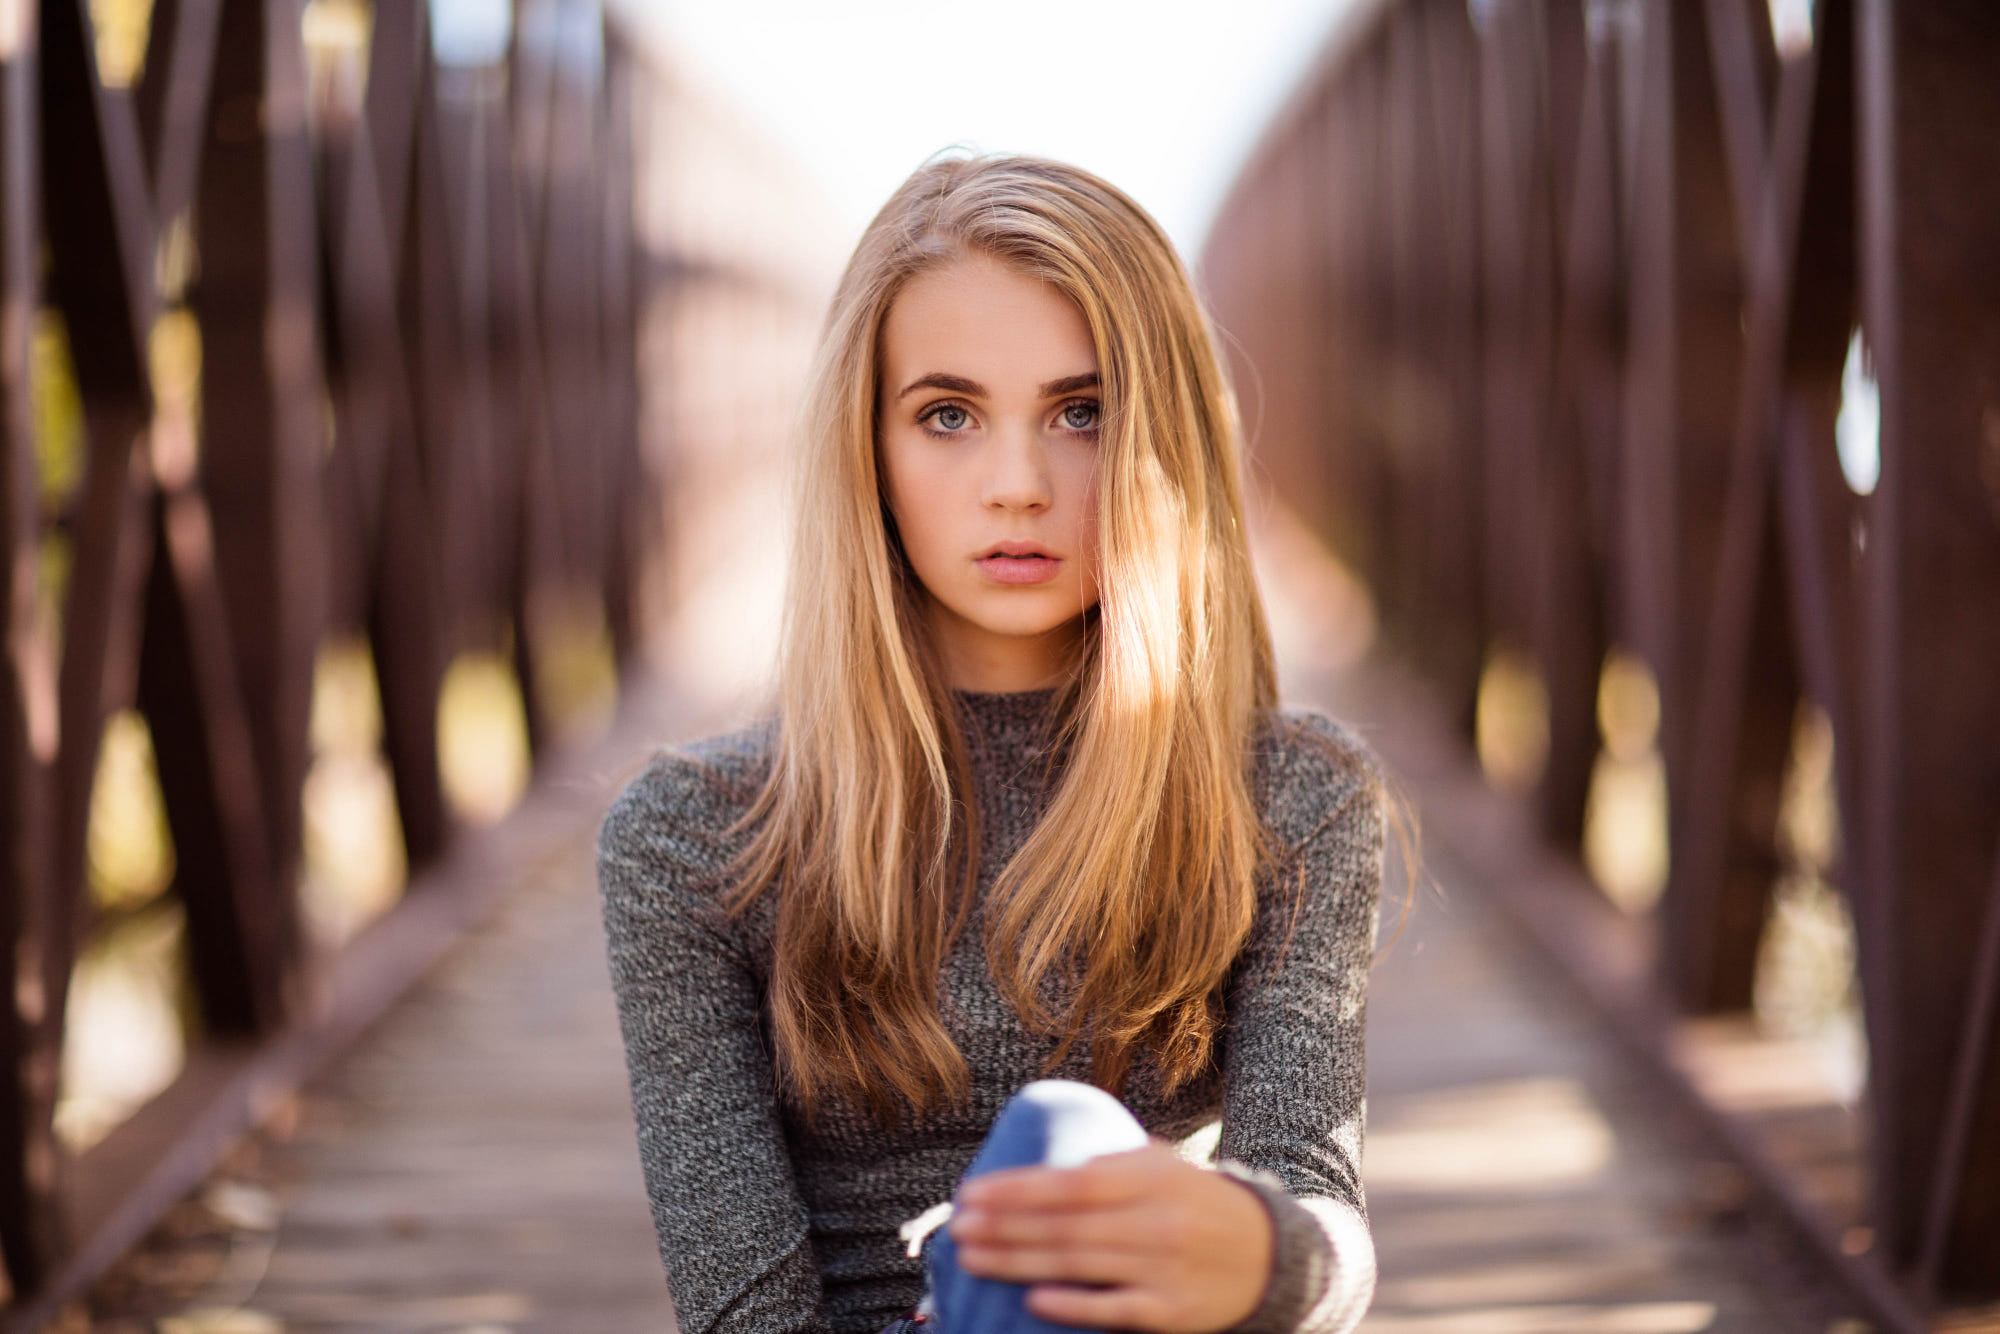 Portrait of a young girl with blond hair